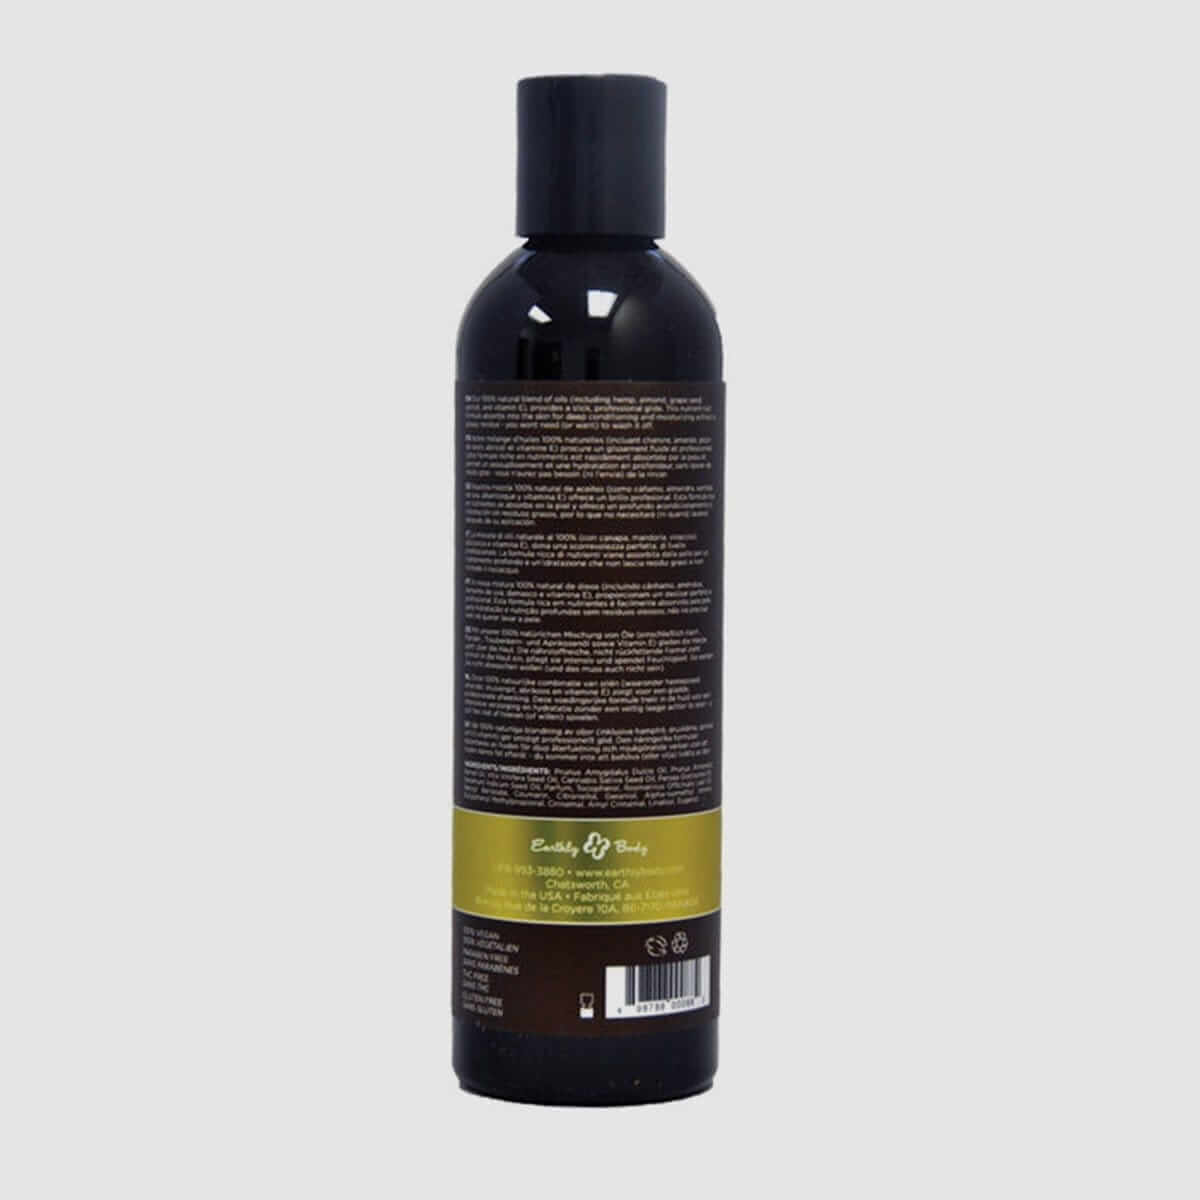 Earthly Body Hemp Seed Massage Oil - Guavalava, 8oz/236ml - Thorn & Feather Sex Toy Canada